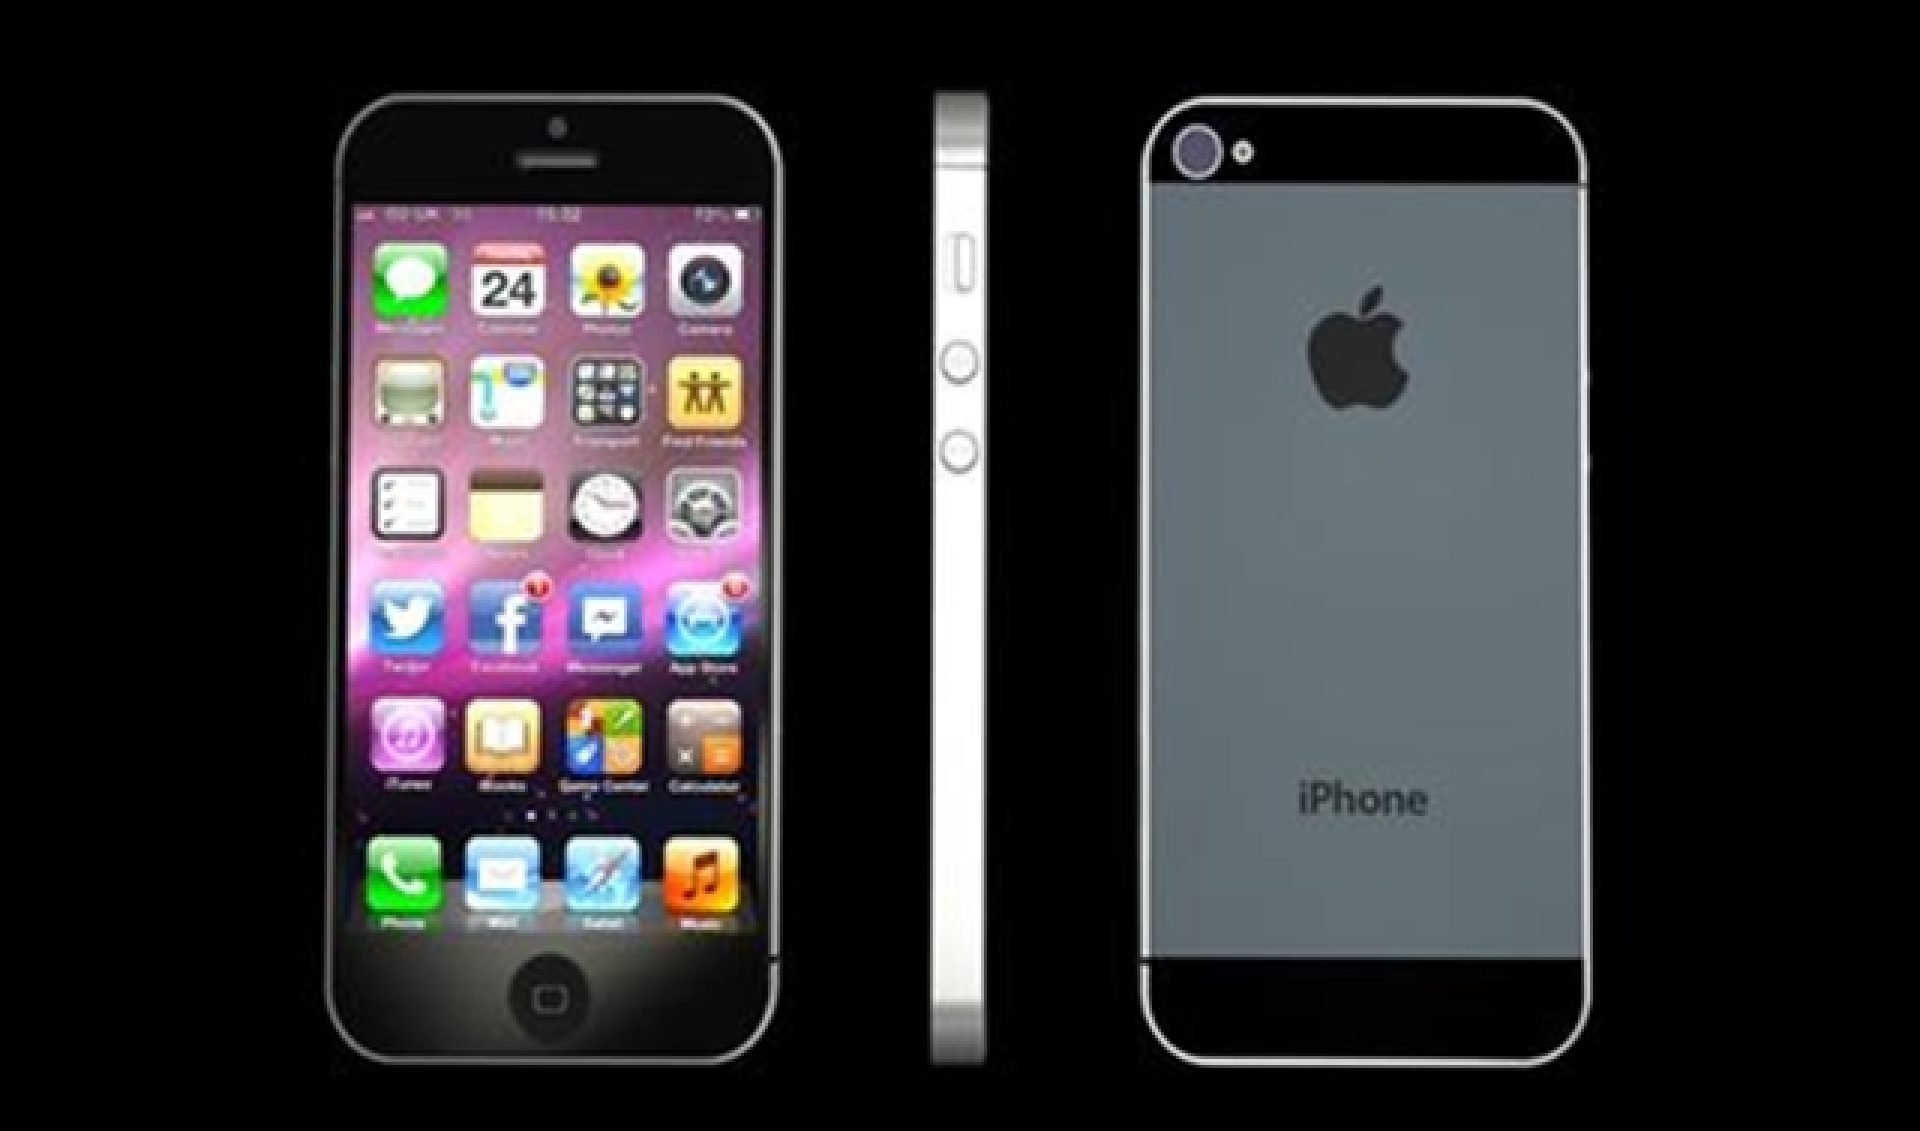 Here are Some iPhone 5 Videos and Live Streams to Check Out Today